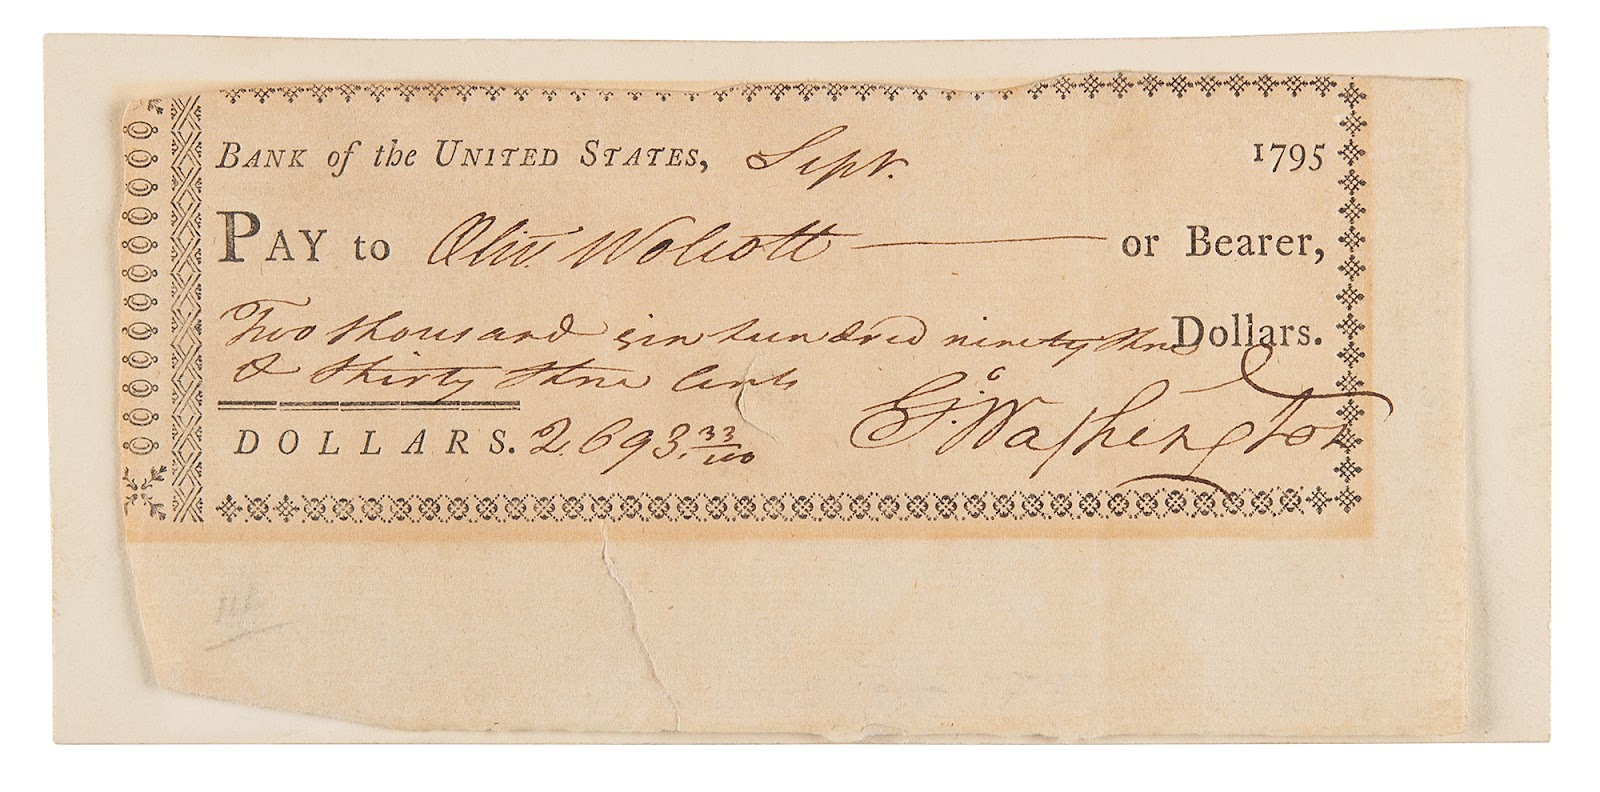 George Washington signed check made payable to Oliver Wolcott, Jr. for a sum of $2693.33.